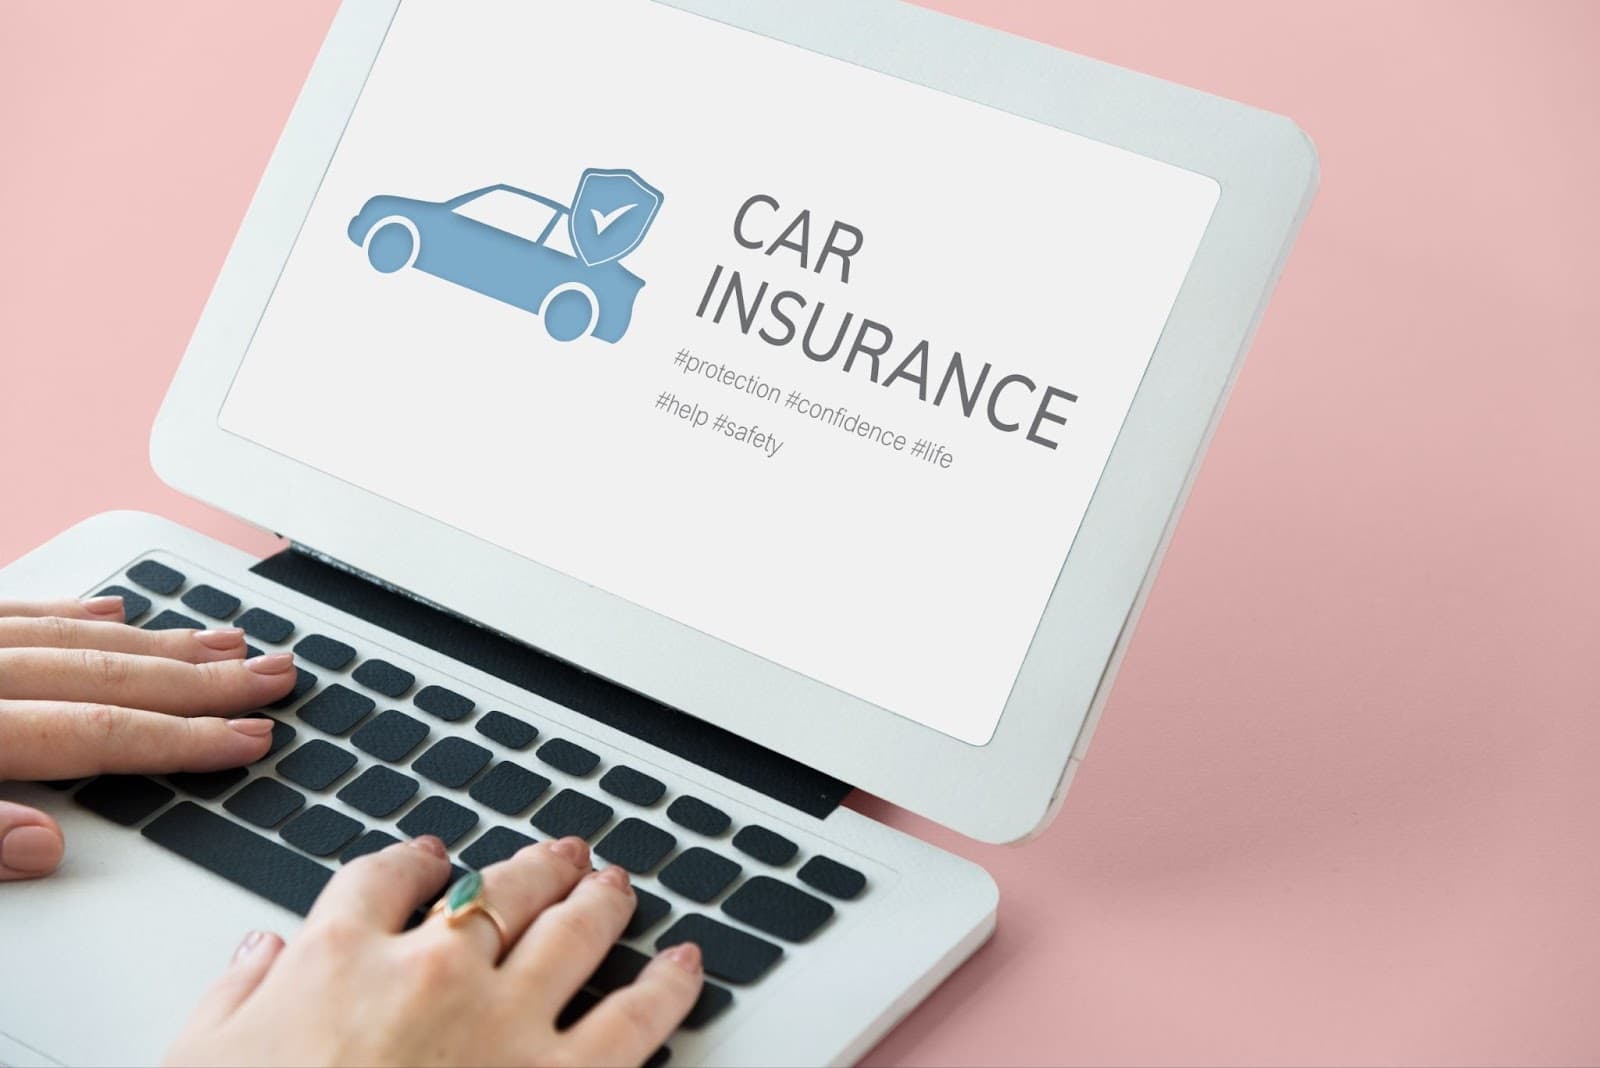 Laptop with car insurance coverage accident benefits